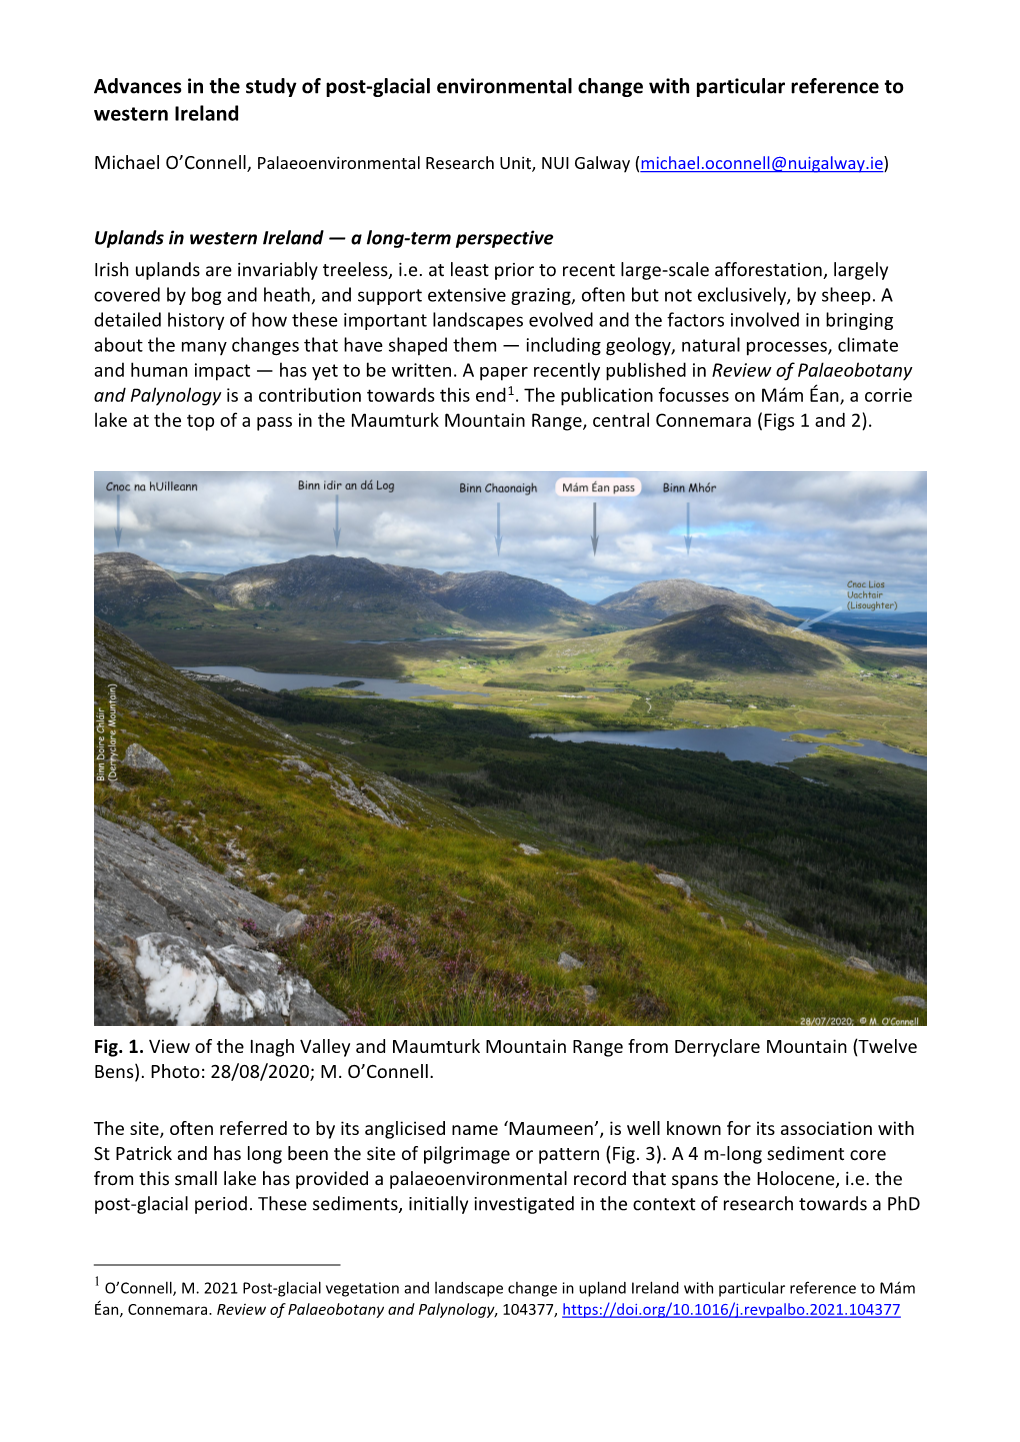 Advances in the Study of Post-Glacial Environmental Change with Particular Reference to Western Ireland